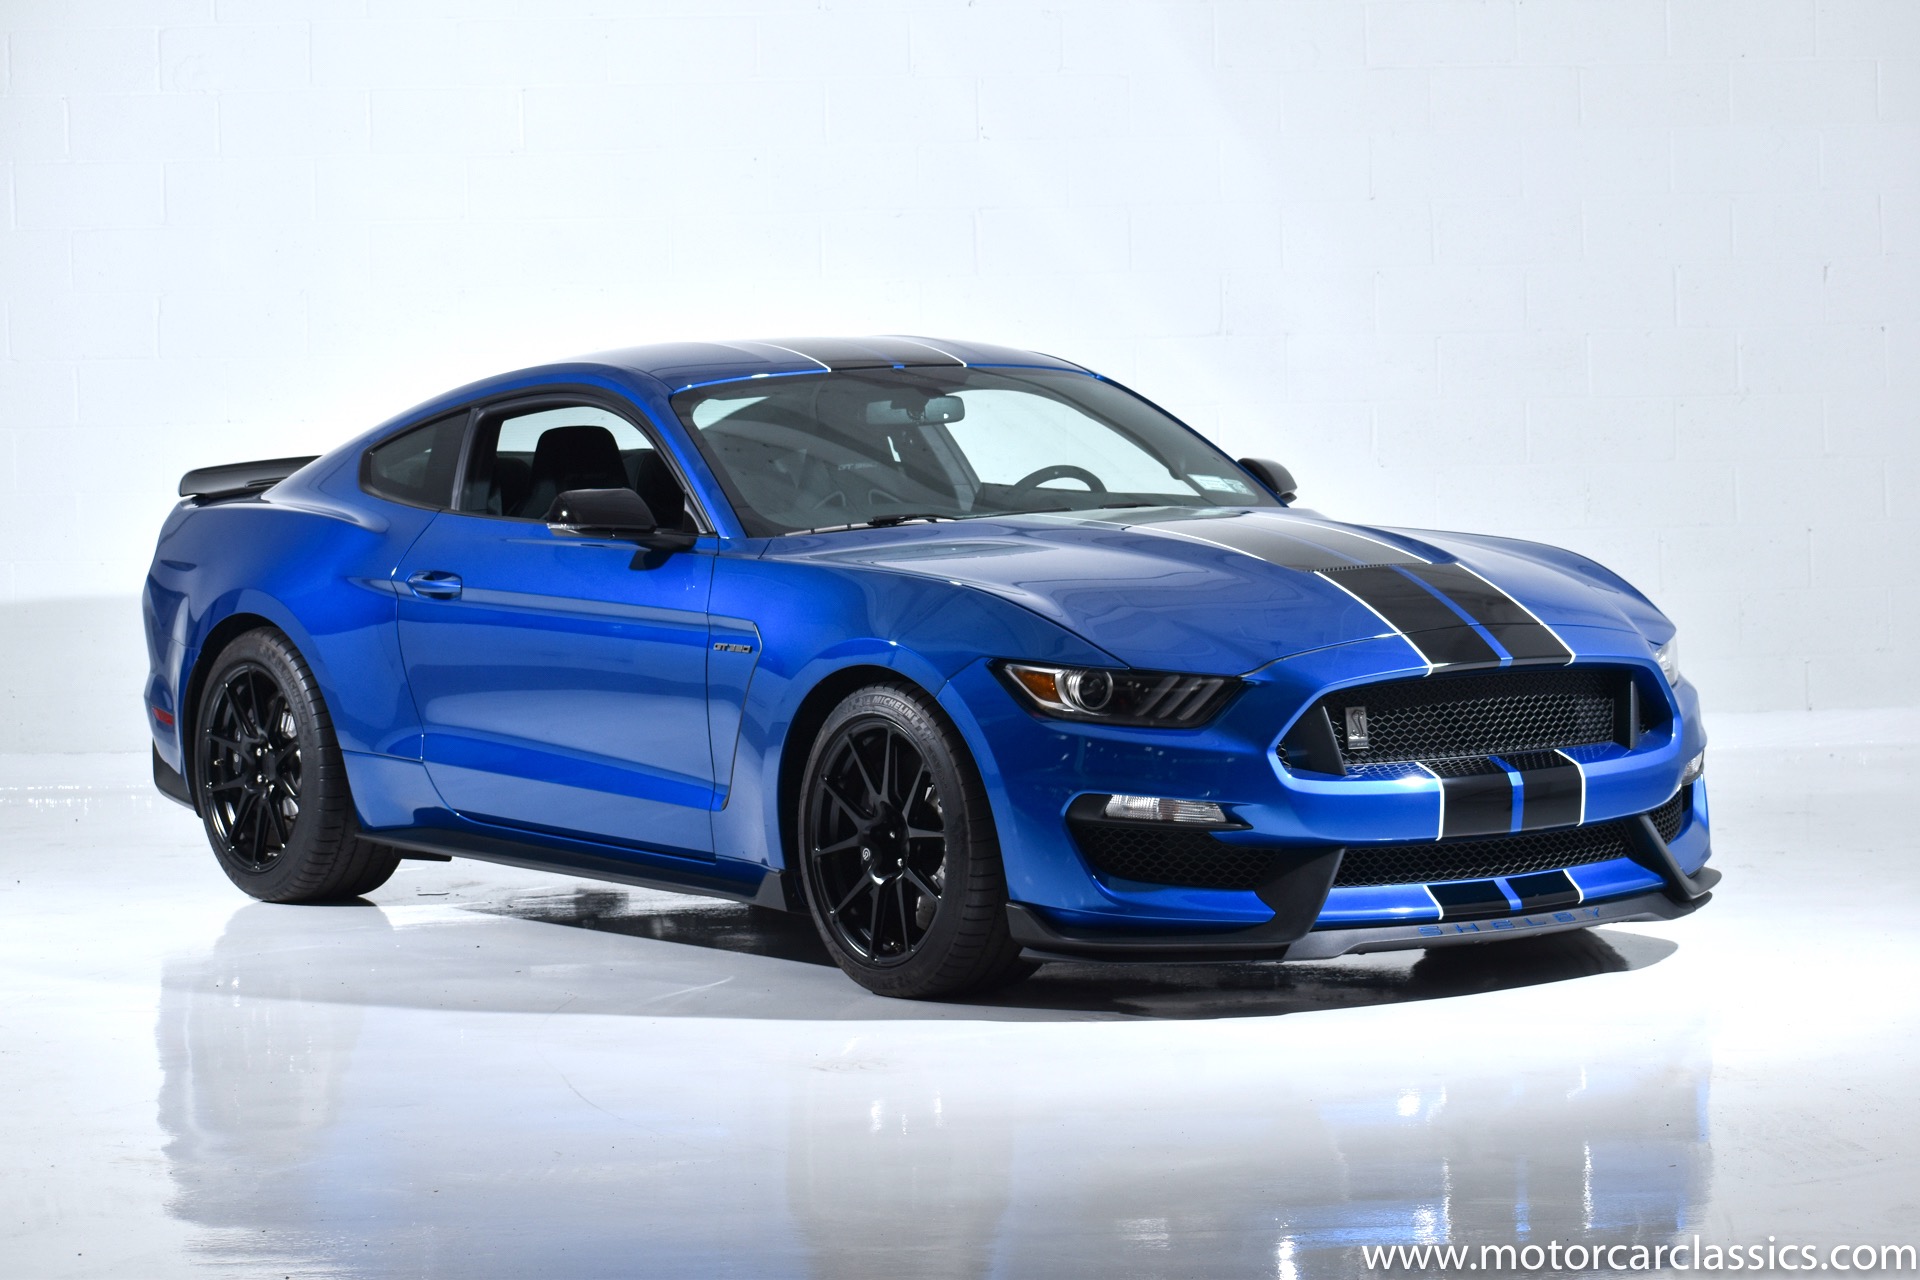 Used 2017 Ford Mustang Shelby GT350 For Sale ($57,900) | Motorcar ...